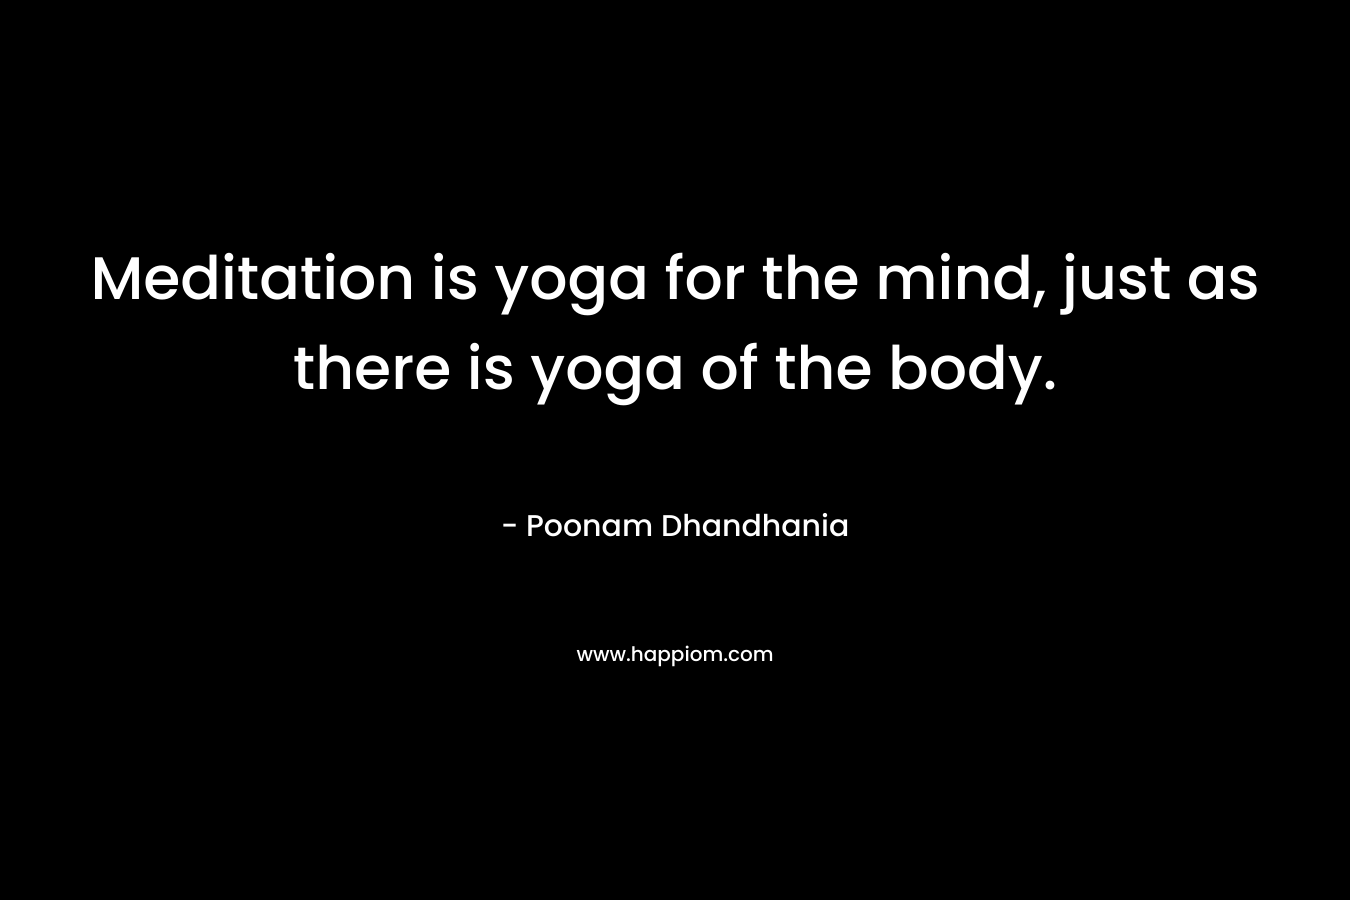 Meditation is yoga for the mind, just as there is yoga of the body. – Poonam Dhandhania